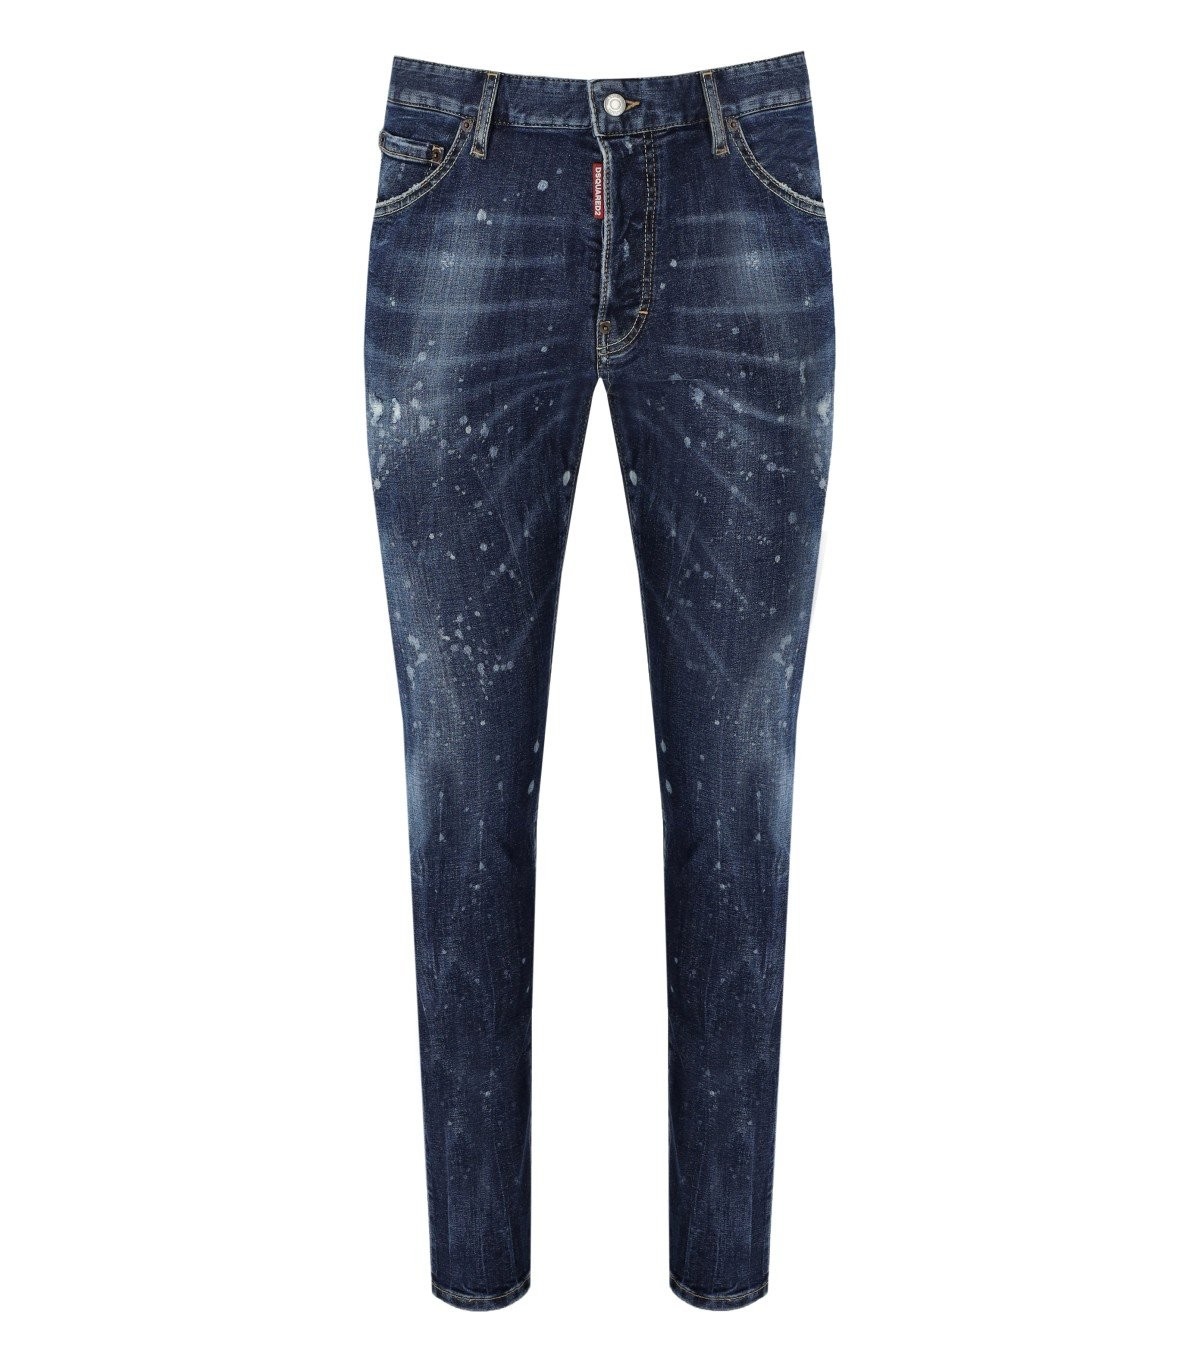 DSQUARED2 COOL GUY MEDIUM BLUE JEANS